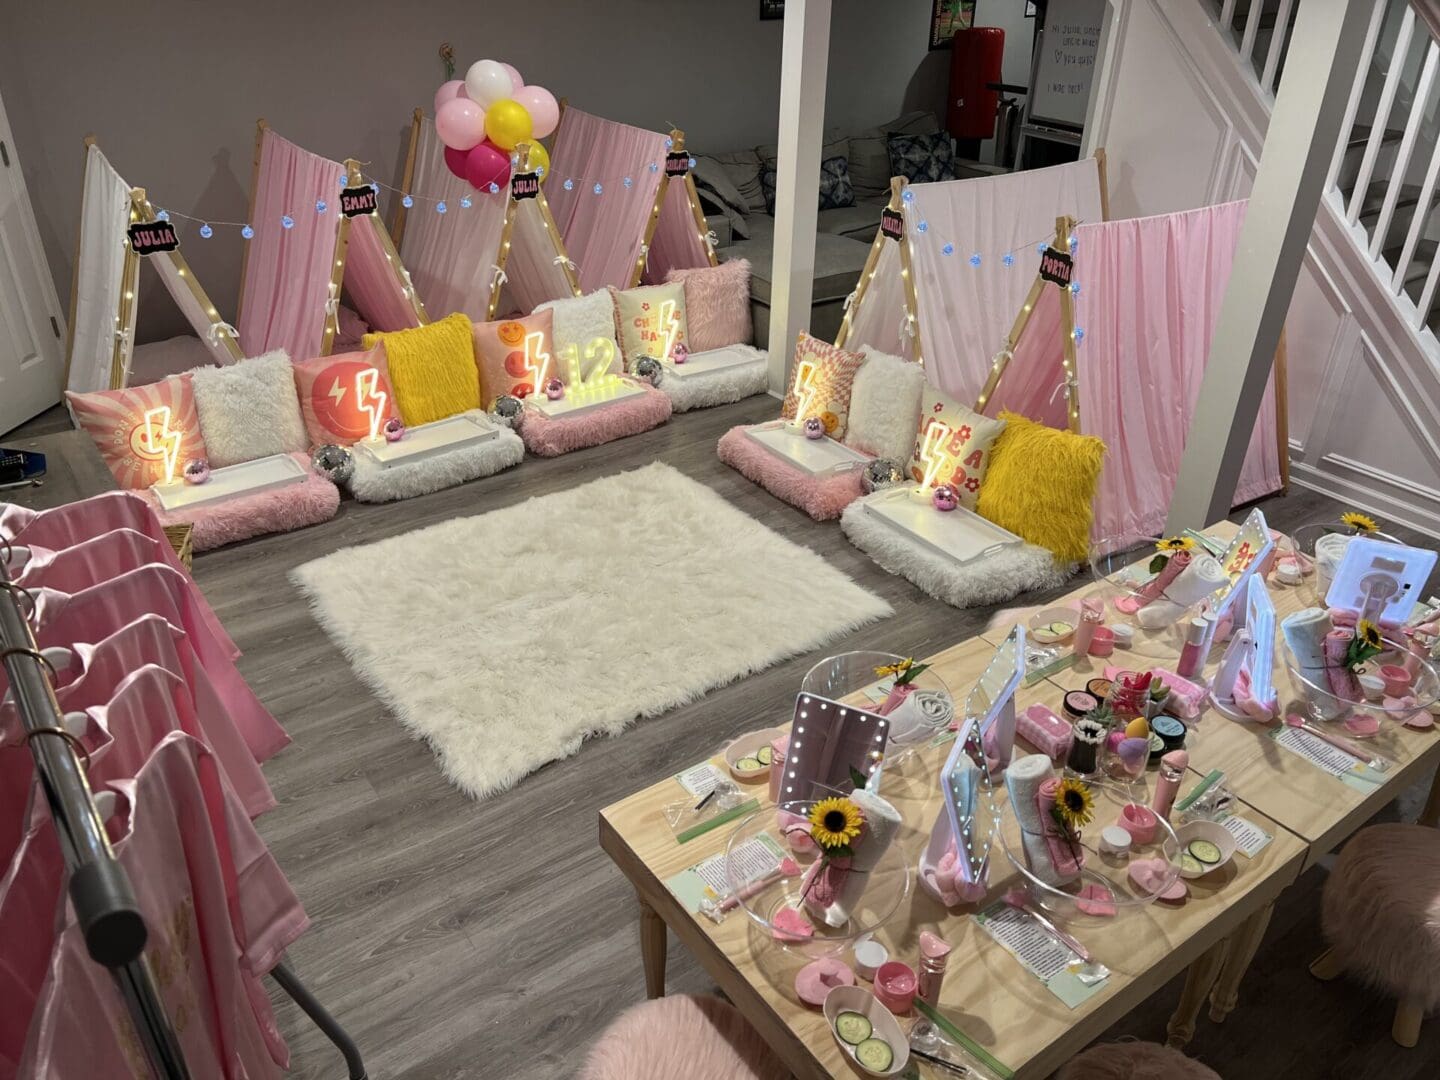 A girl's birthday party with teepee tents and balloons.